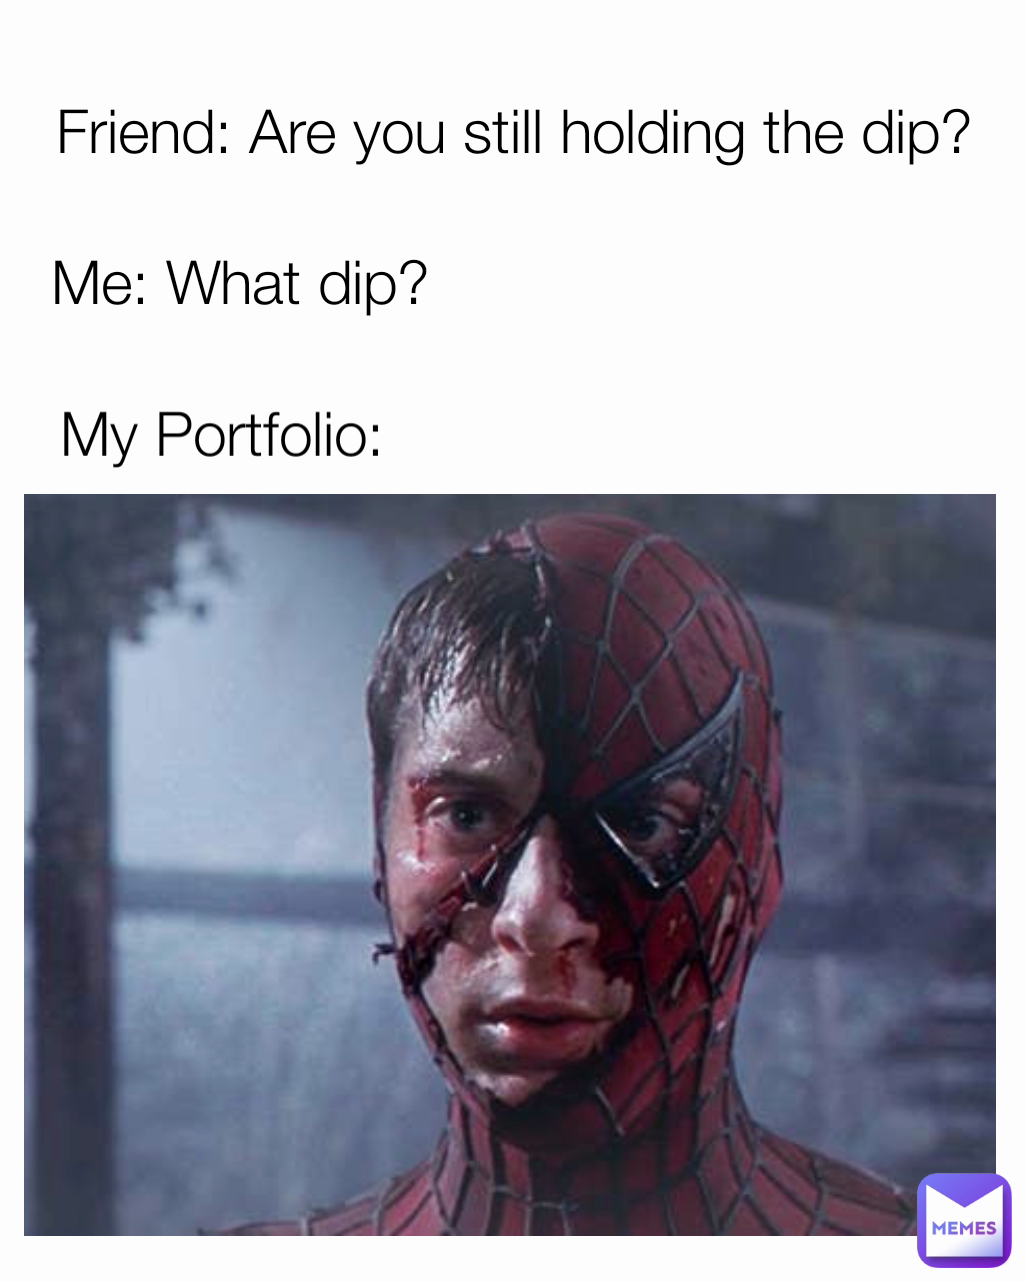 Me: What dip? Friend: Are you still holding the dip? My Portfolio: